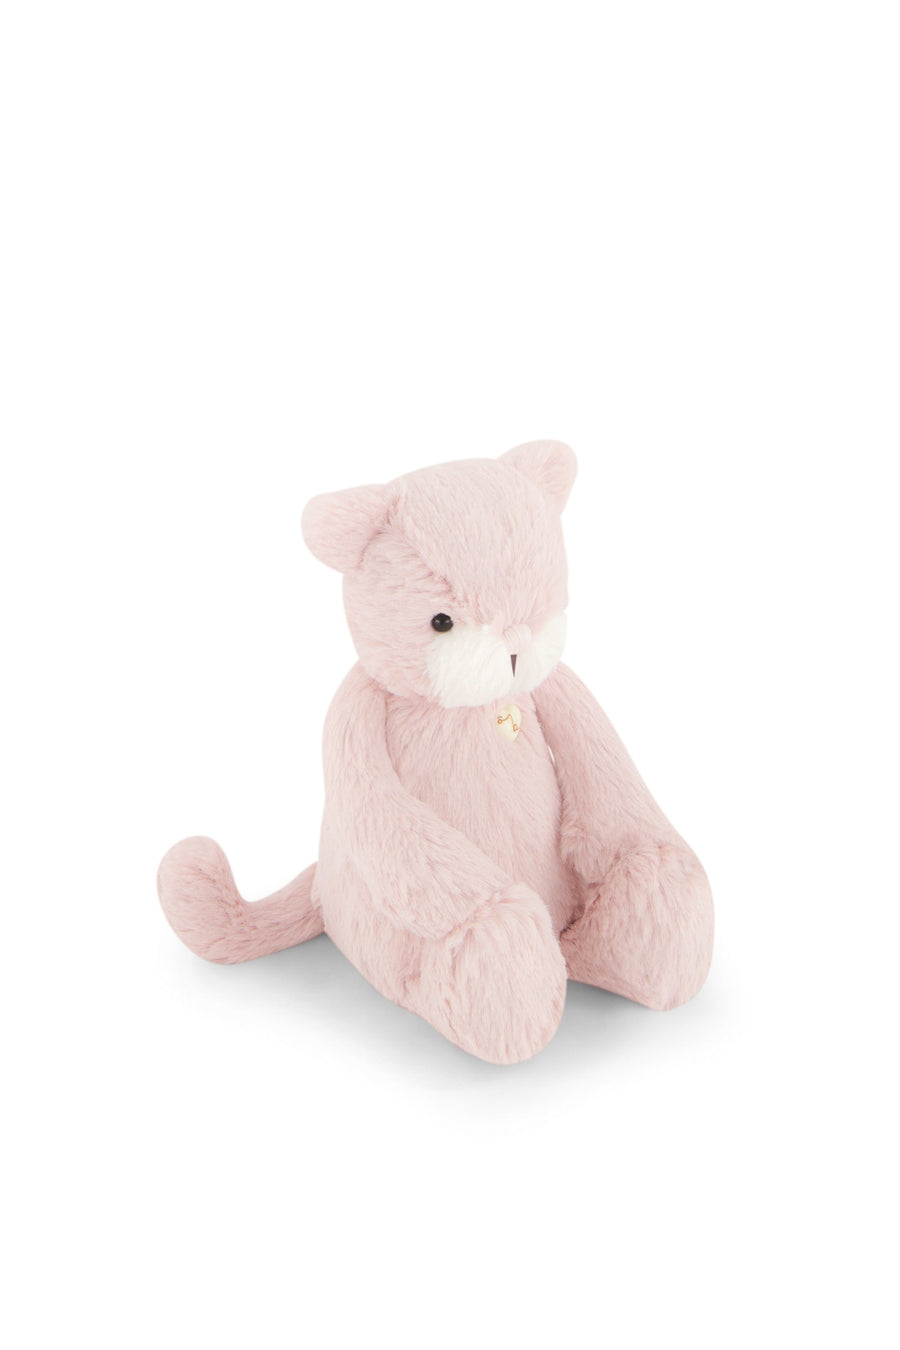 Snuggle Bunnies - Elsie the Kitty - Blush Childrens Toy from Jamie Kay NZ